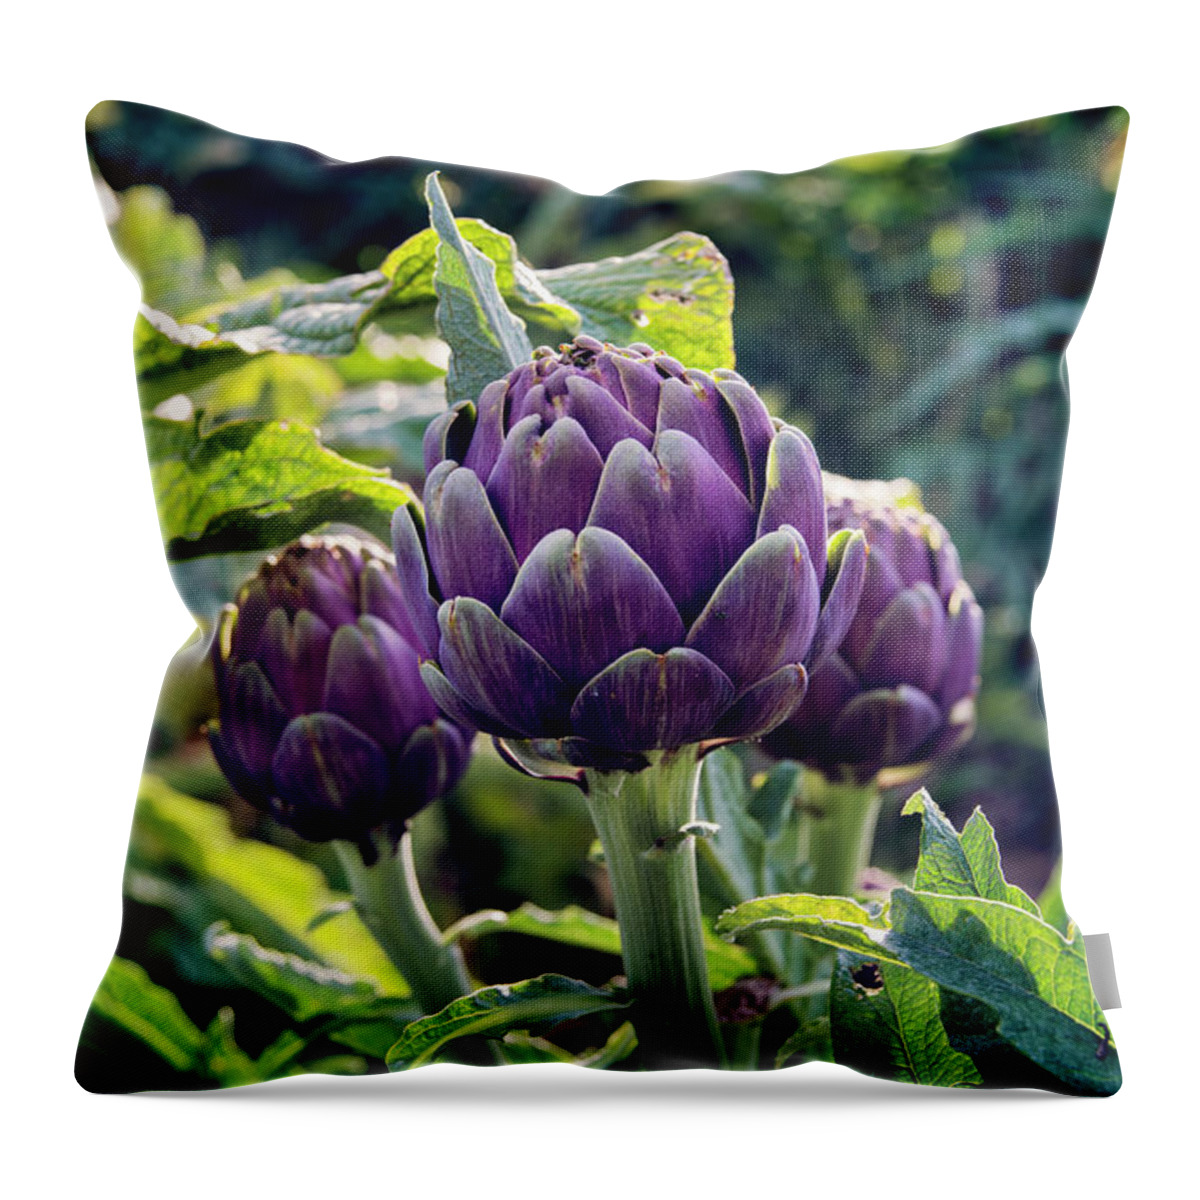 Agricultural Activity Throw Pillow featuring the photograph Fresh Globe Artichokes Growing In A Farm by Laura Battiato